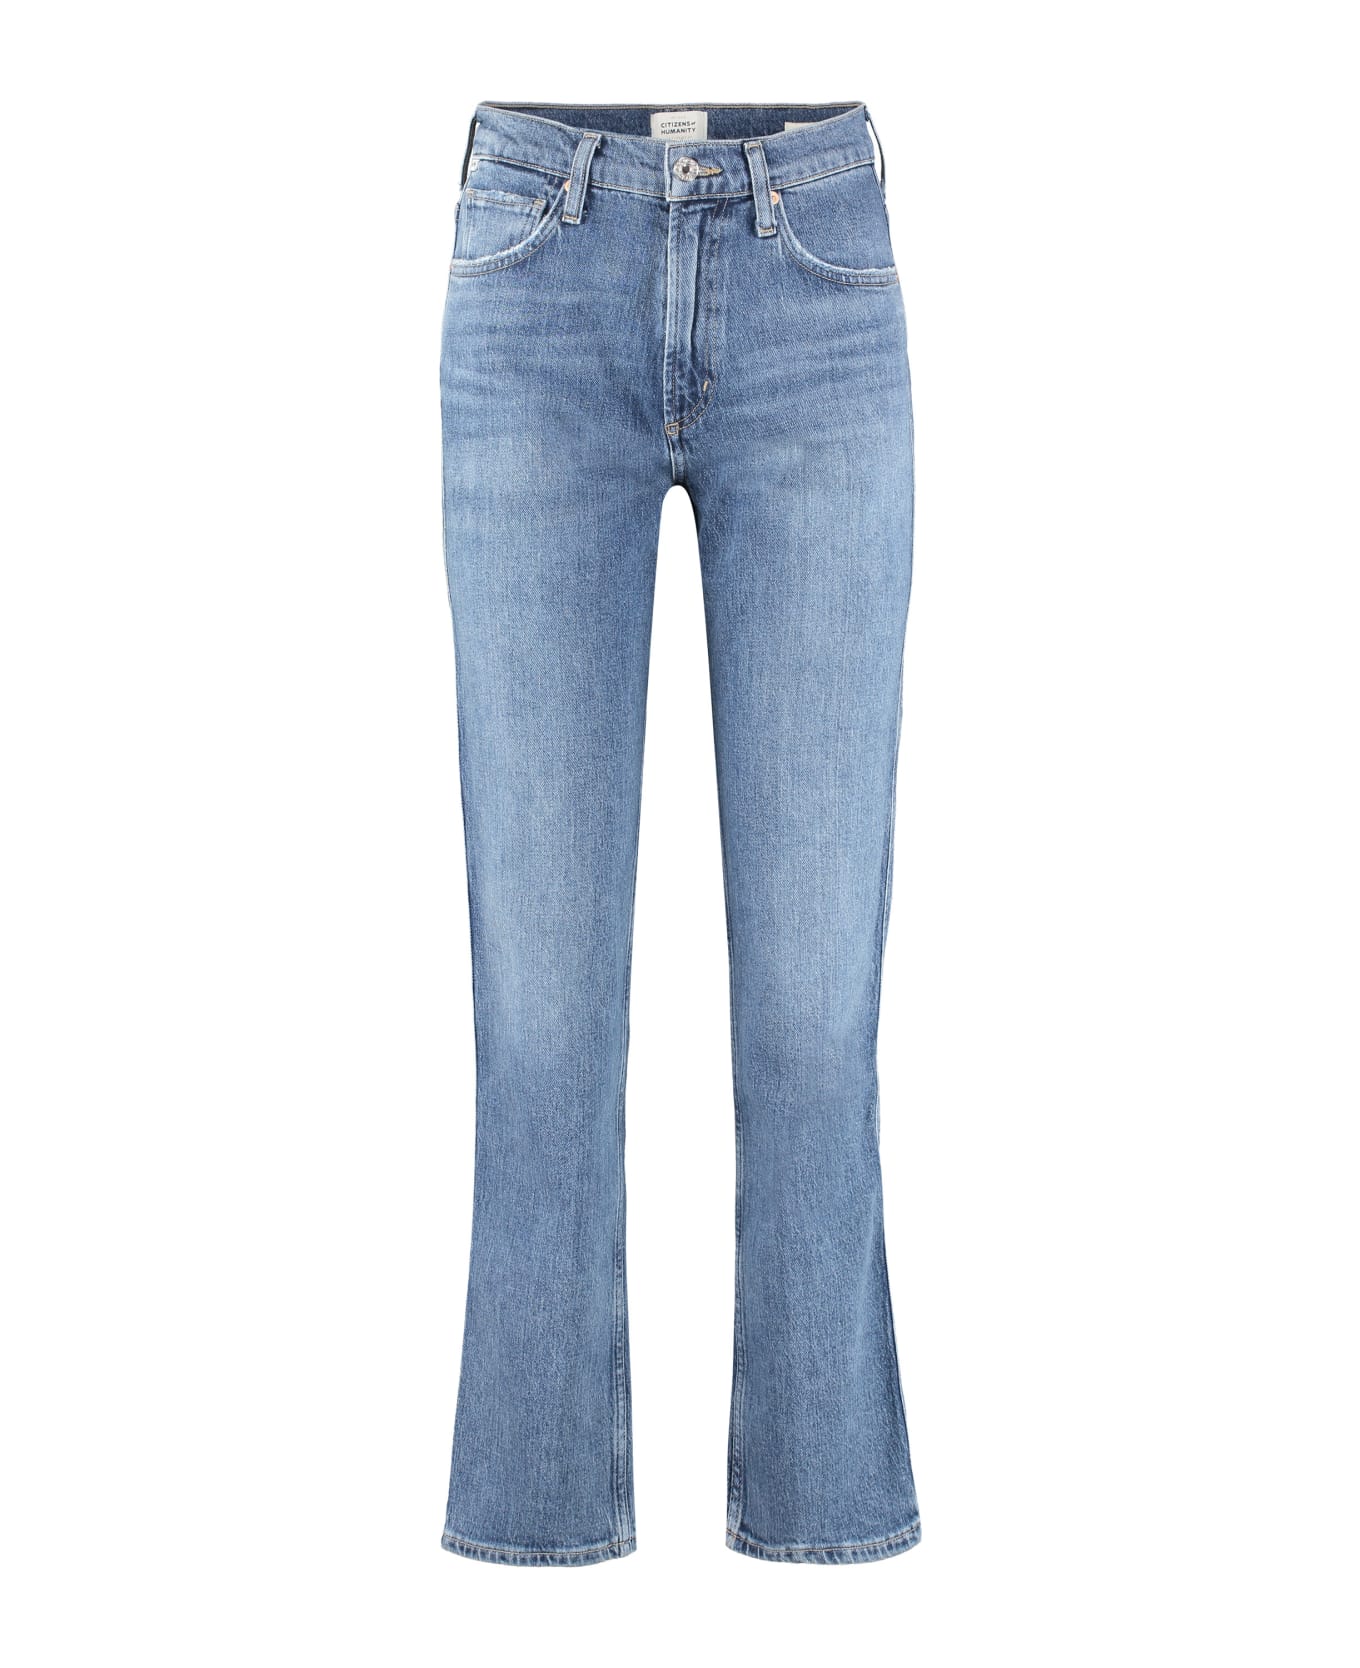 Citizens of Humanity Daphne Stovepipe Jeans - Denim